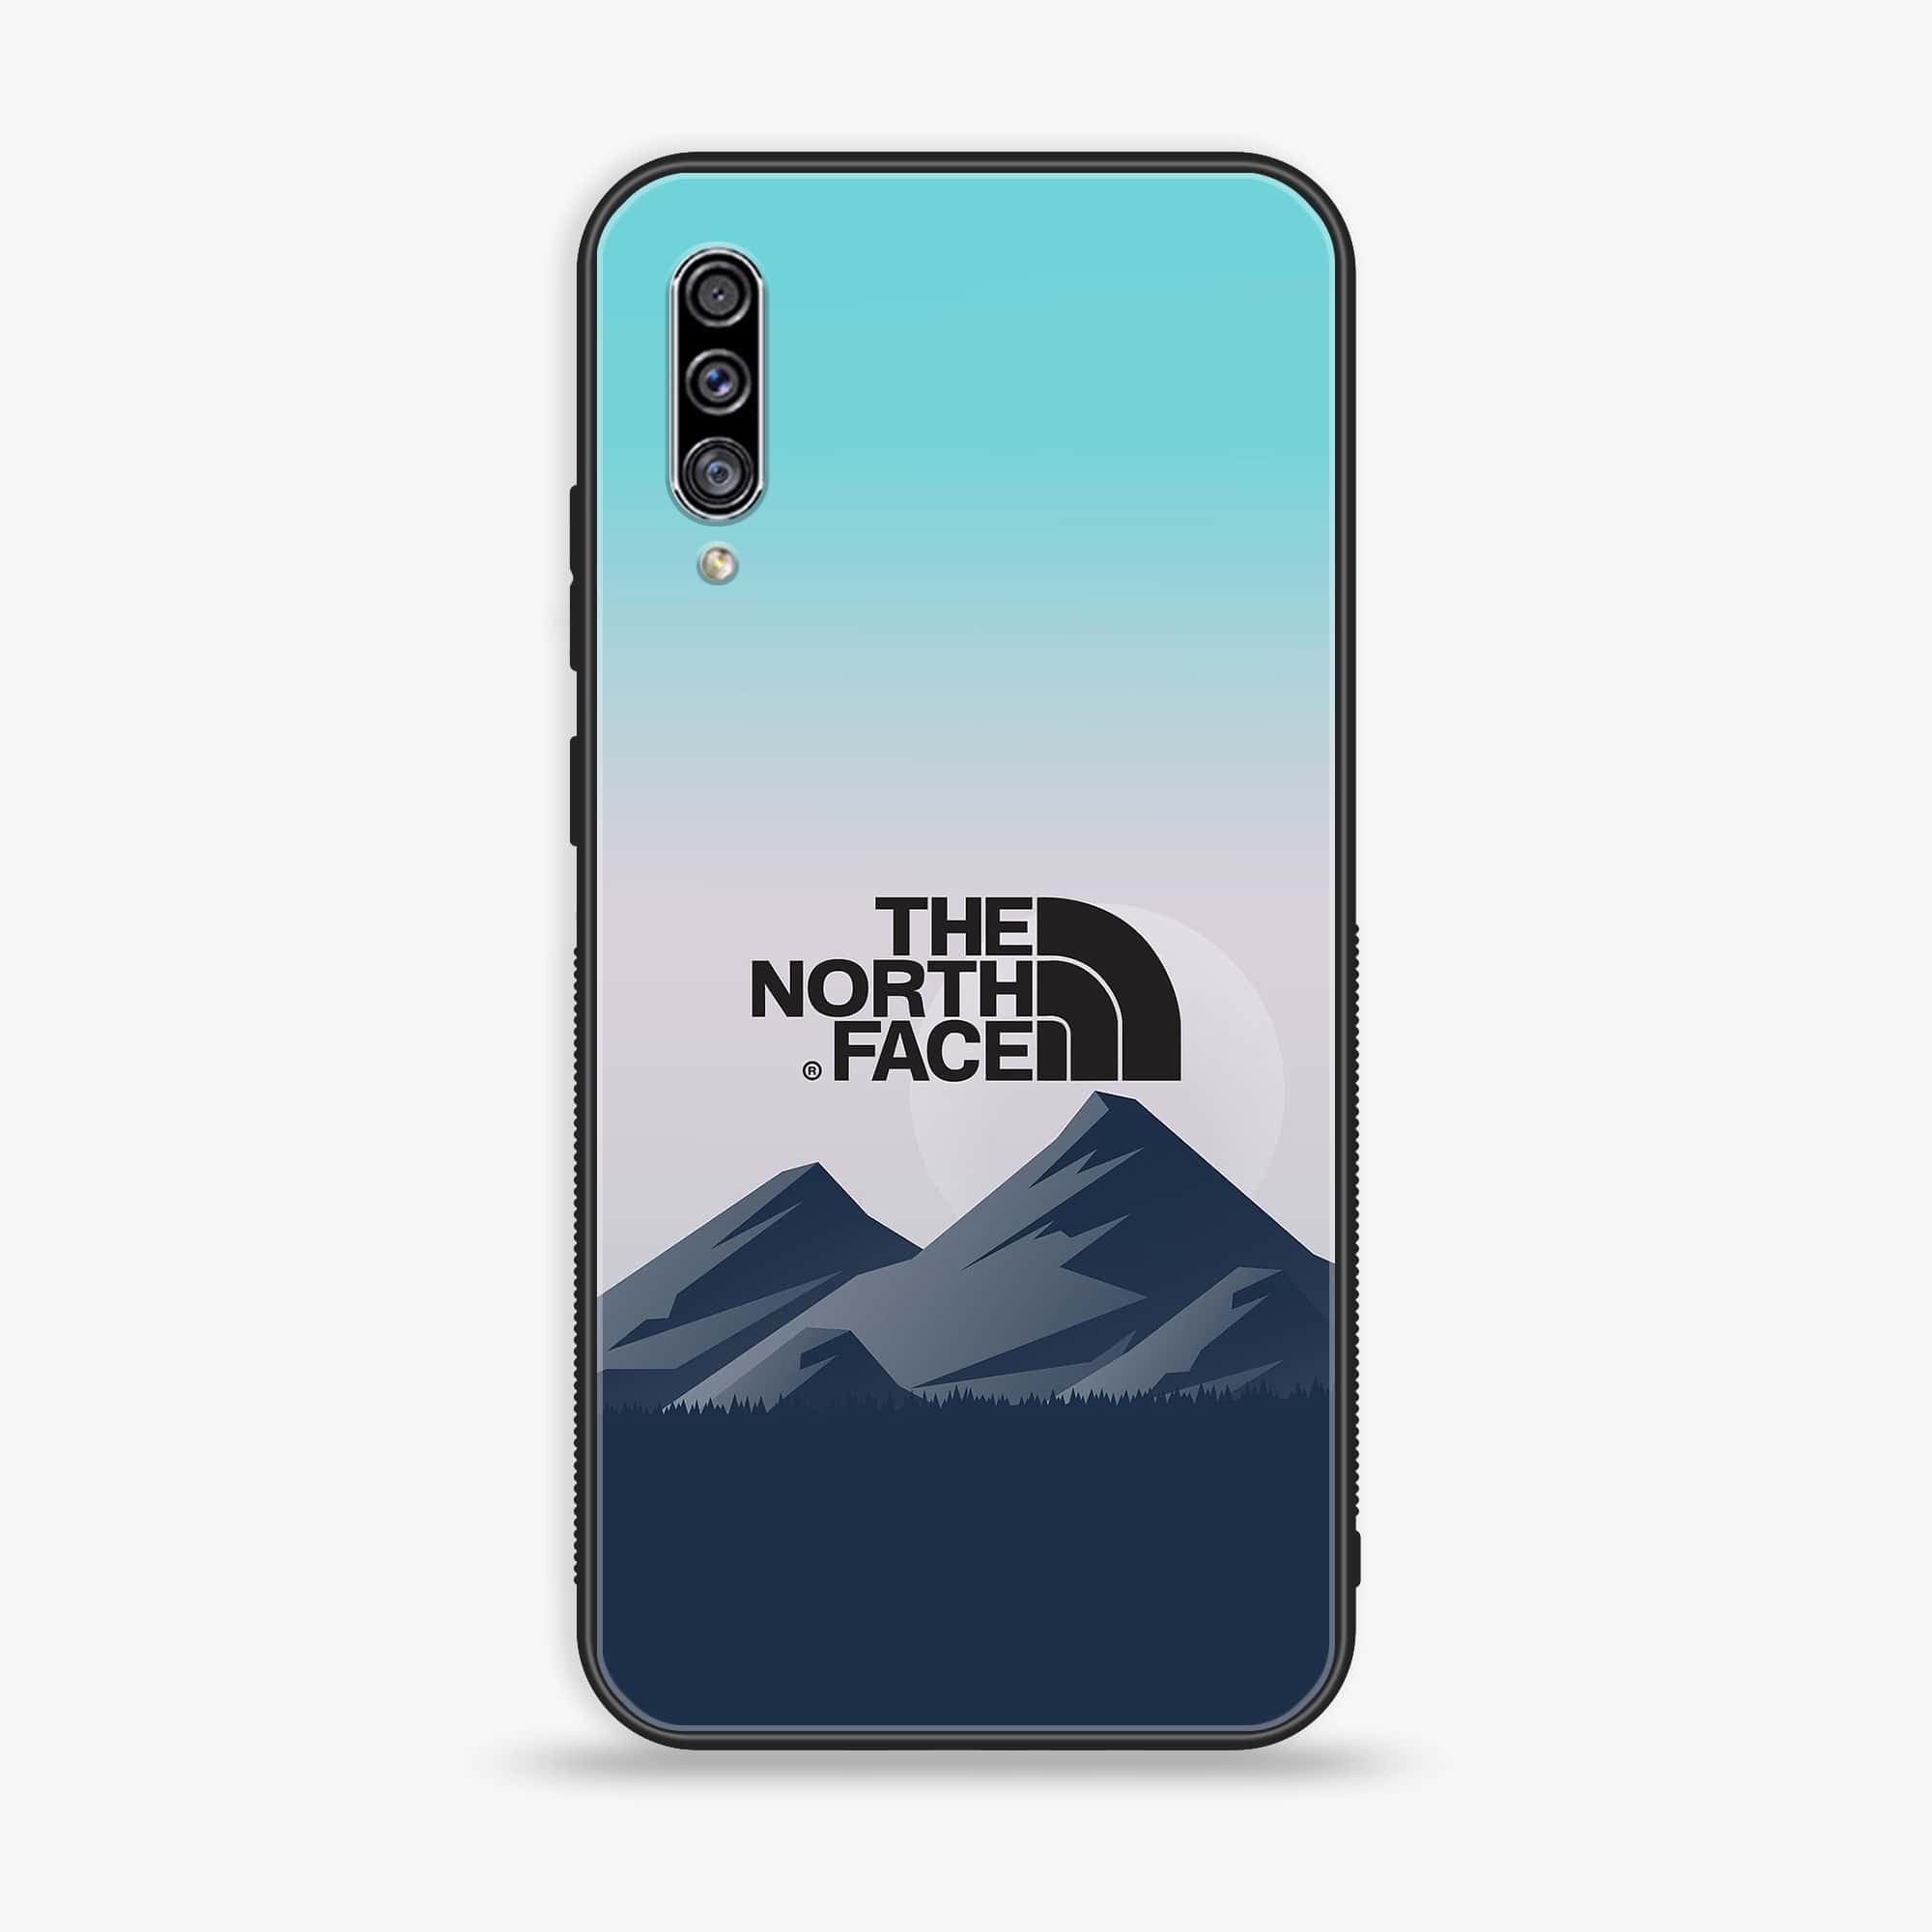 Galaxy A50/ A50s/ A30s - The North Face Series - Premium Printed Glass soft Bumper shock Proof Case